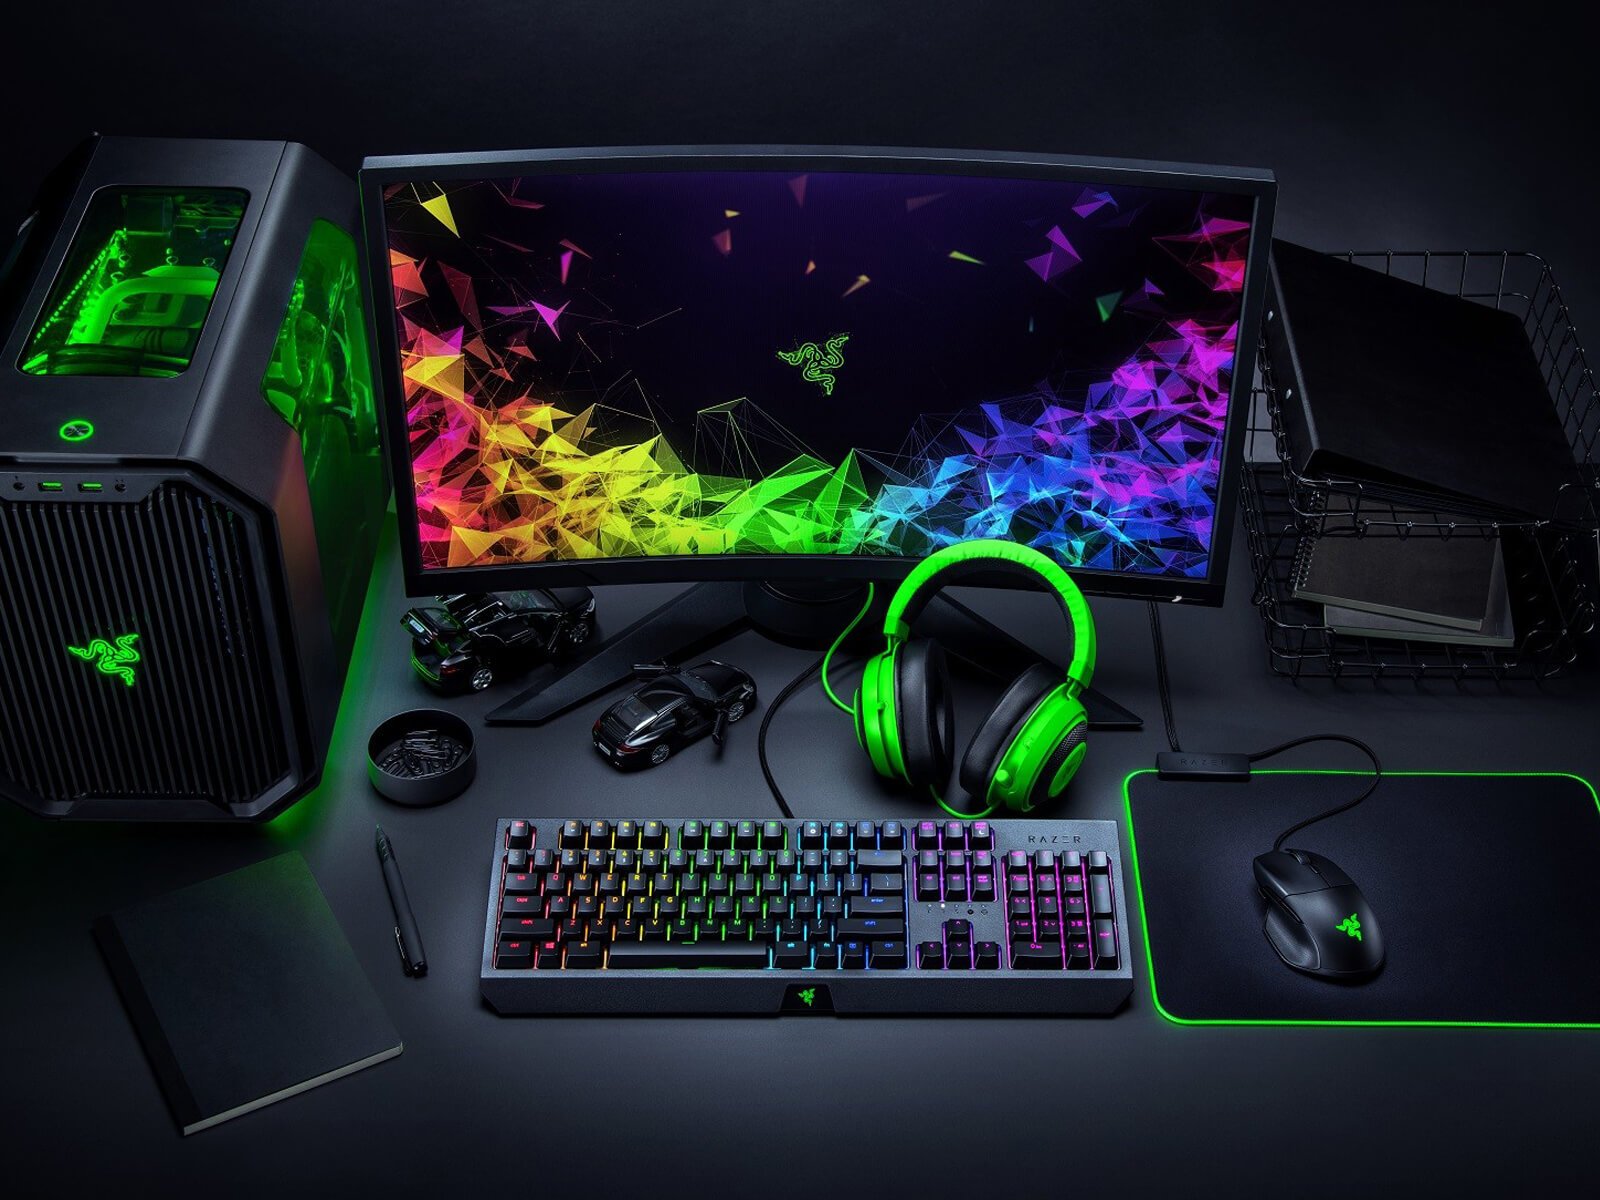 Essential Accessories to Complete Your Gaming Setup